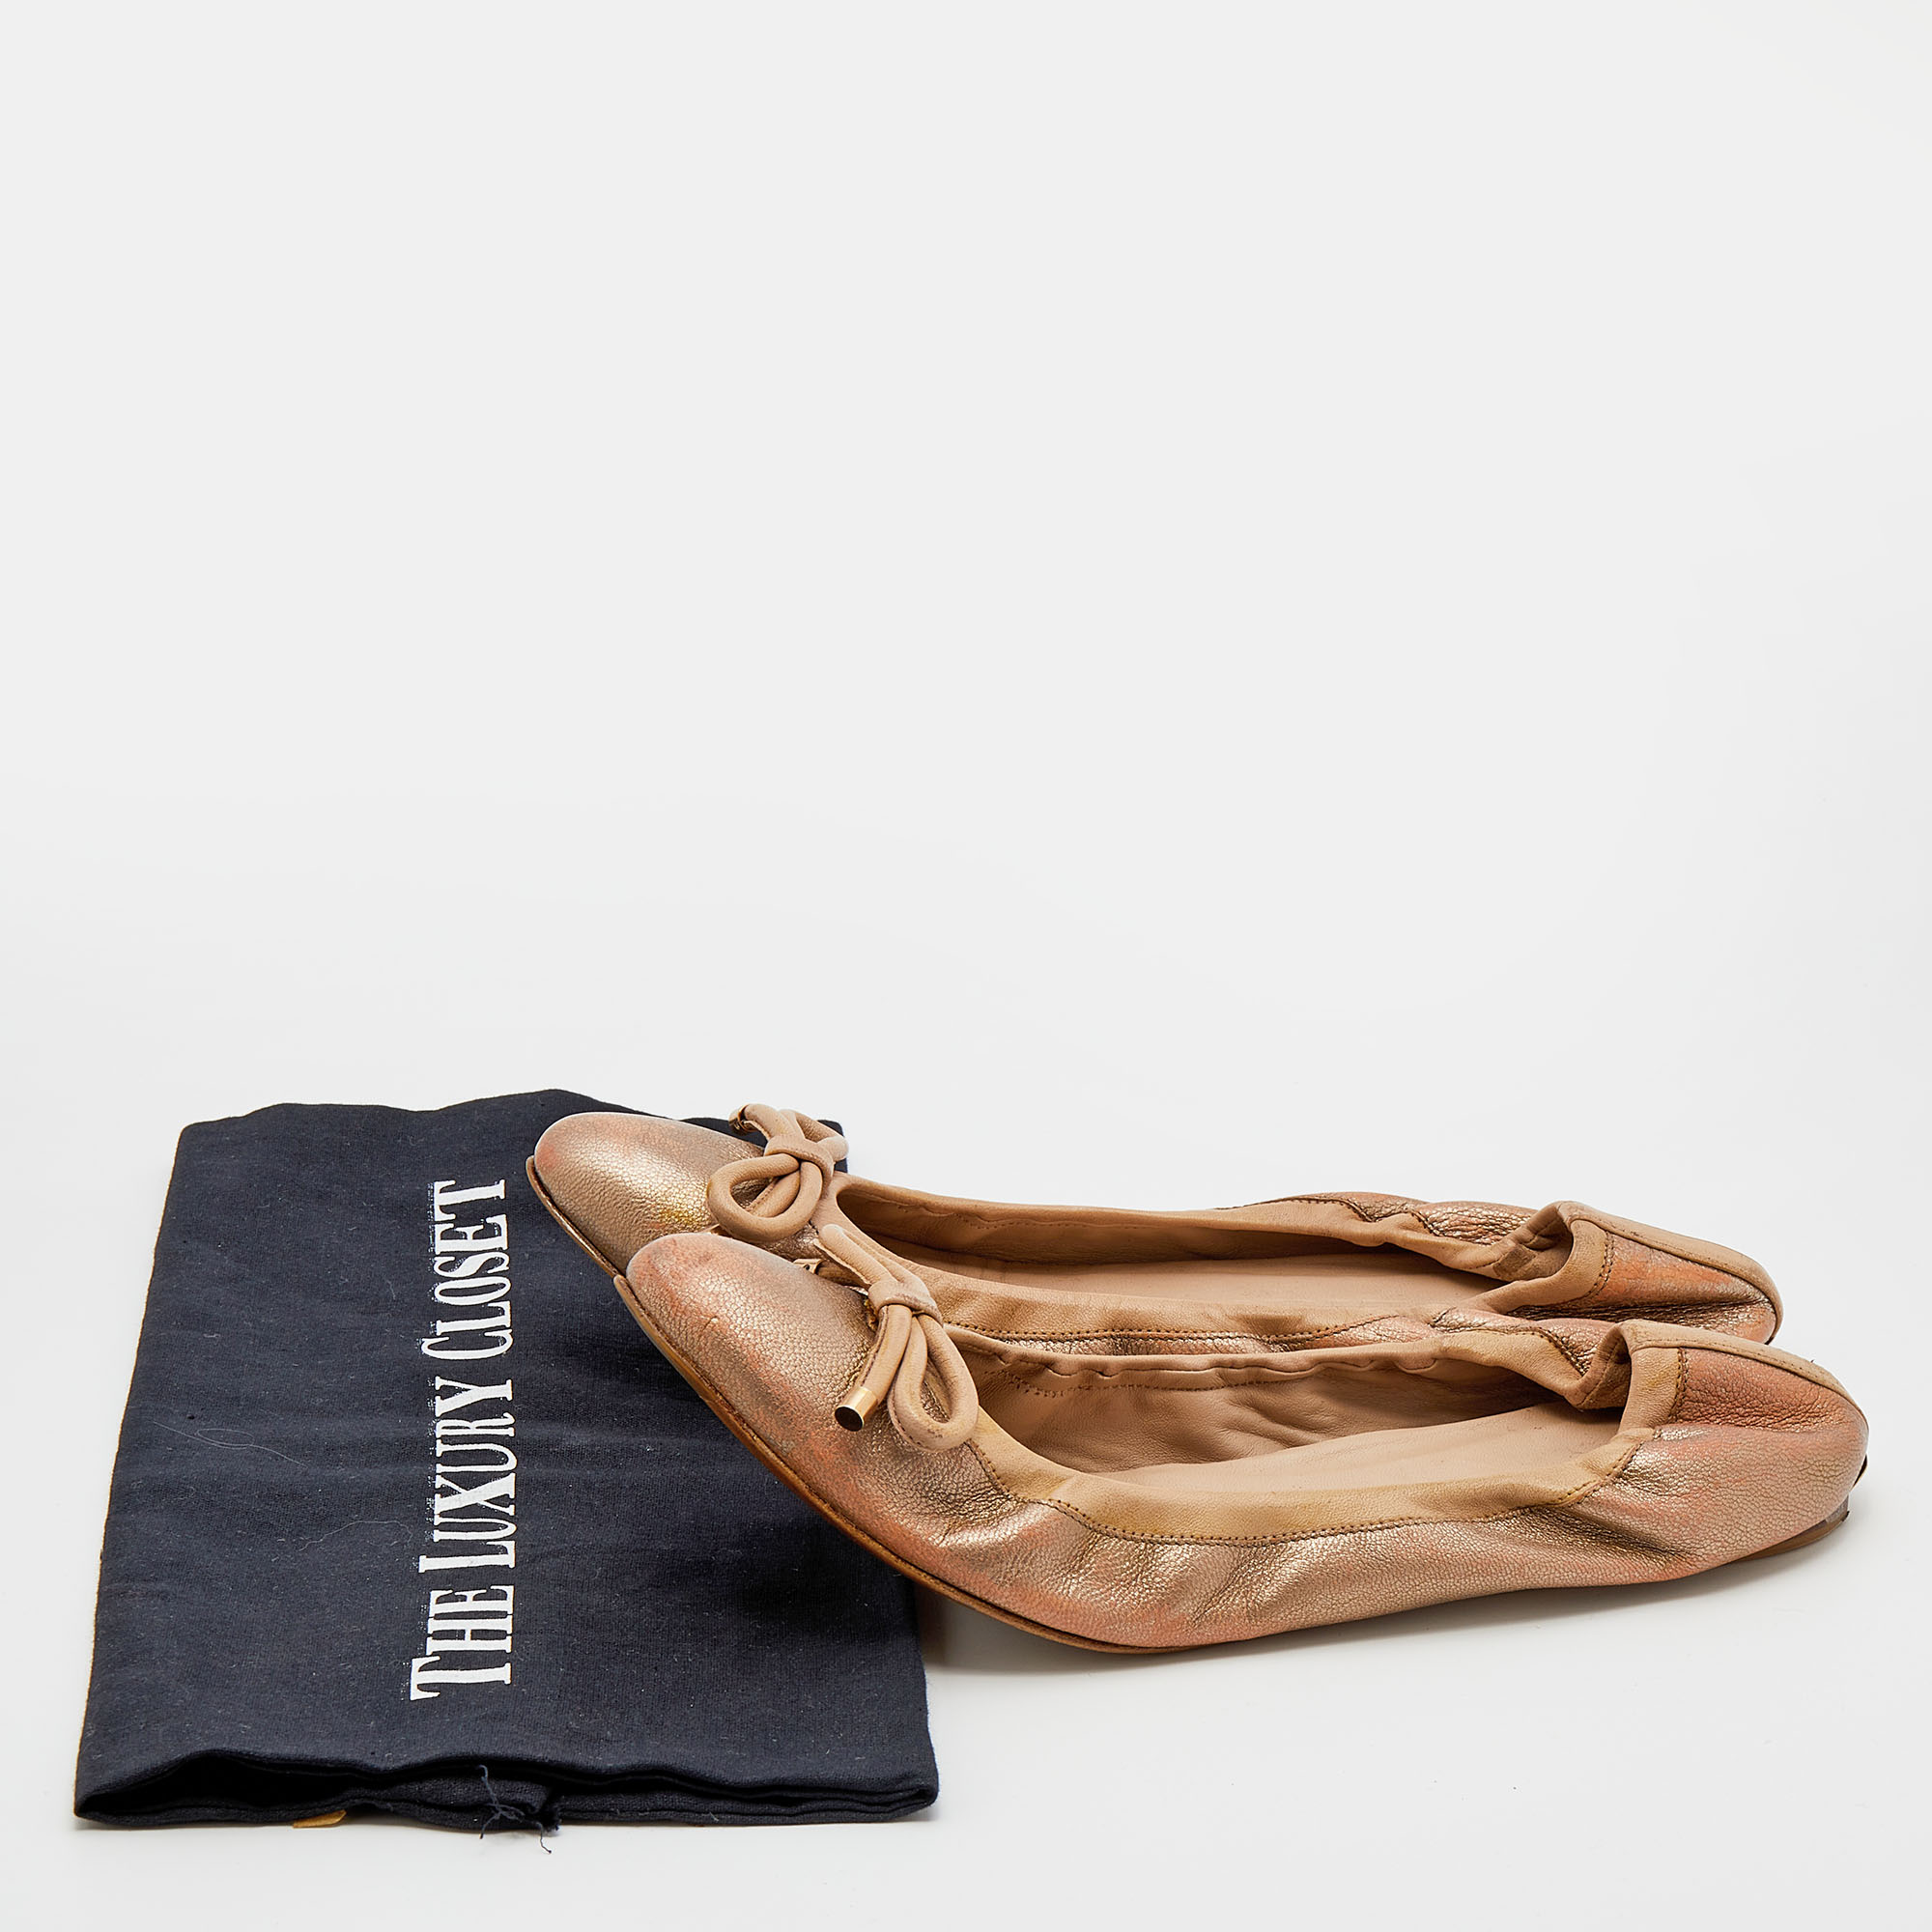 Burberry Metallic Gold Leather Bow Scrunch Ballet Flats Size 39